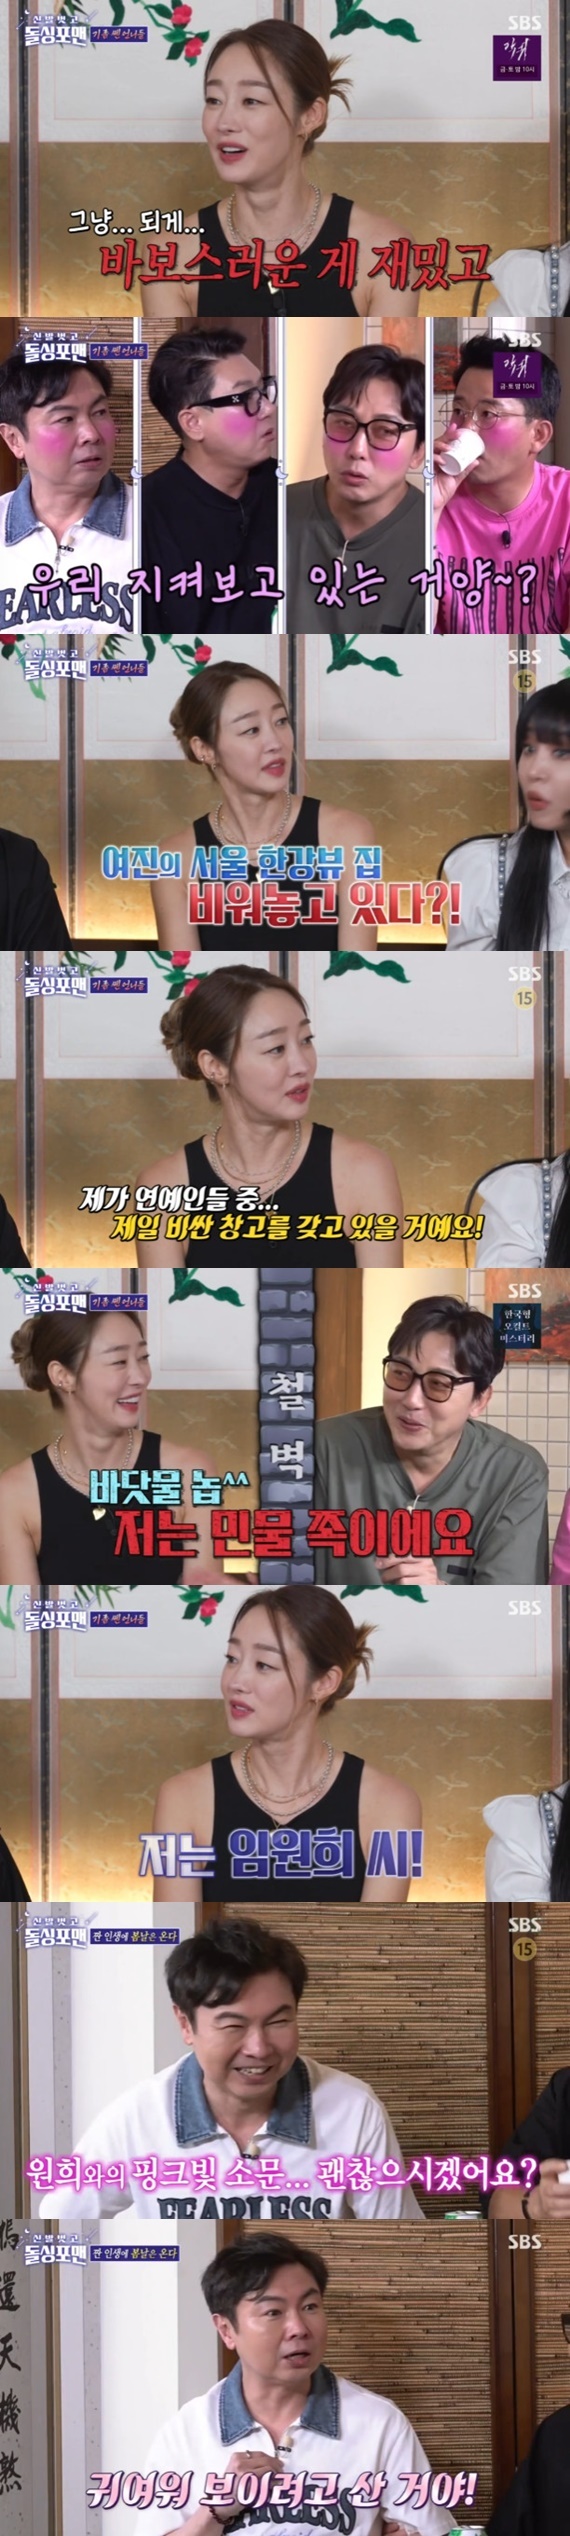 Seoul =) = Actor Choi Yeo-jin caught the eye by expressing Seoul house as expensive Warehouse in Dollsing4men with shoes off.Choi Yeo-jin, Lalal, and Park Se-mi joined the SBS entertainment show Dollsing4men (hereinafter referred to as Dollsing4men), which aired on the afternoon of the 27th.On this day, Choi Yeo-jin said that he is an enthusiast to promote Dollsing4men and said, It is funny to be stupid. He talked about the charm of Dollsing4men.Choi Yeo-jin added, Ive seen you play futsal, but how can you not do that? He added, Its the first time Ive seen you cry and cry for years.Choi Yeo-jin was surprised to hear that he was leaving a house with a view of the Han River.Choi Yeo-jin likened the house to Warehouse, saying, I will have the most expensive Warehouse among entertainers.Choi Yeo-jin said, I live in a 2-degree 5-village life. He added that he spent two days a week in Seoul and five days at Cheongshim International Academy enjoying water skiing and other hobbies.Choi Yeo-jin expressed satisfaction with life that feels nature, saying, I am getting better at Cheongshim International Academy.When Lee Sang-min invited Tak Jae-hun to change to Jeju Island, Choi Yeo-jin laughed as he shook his head and said, I am on the side of fresh water.Tak Jae-hun, Im Won-hee, and Lee Sang-min were popular votes, and Choi Yeo-jin chose Im Won-hee without hesitation.Im Won-hee doubted the surprise camera on the unexpected Choices and said, Im already dating with imagination.Choi Yeo-jin added to the reason why I chose Im Won-hee, saying, I like people who smell like people, and I look good when I tear them one by one.On the other hand, SBS Dollsing4men is a talk show of Dollsing, which guarantees 200% of guest satisfaction, from a love story to realistic advice. It is broadcast every Tuesday at 9 pm.